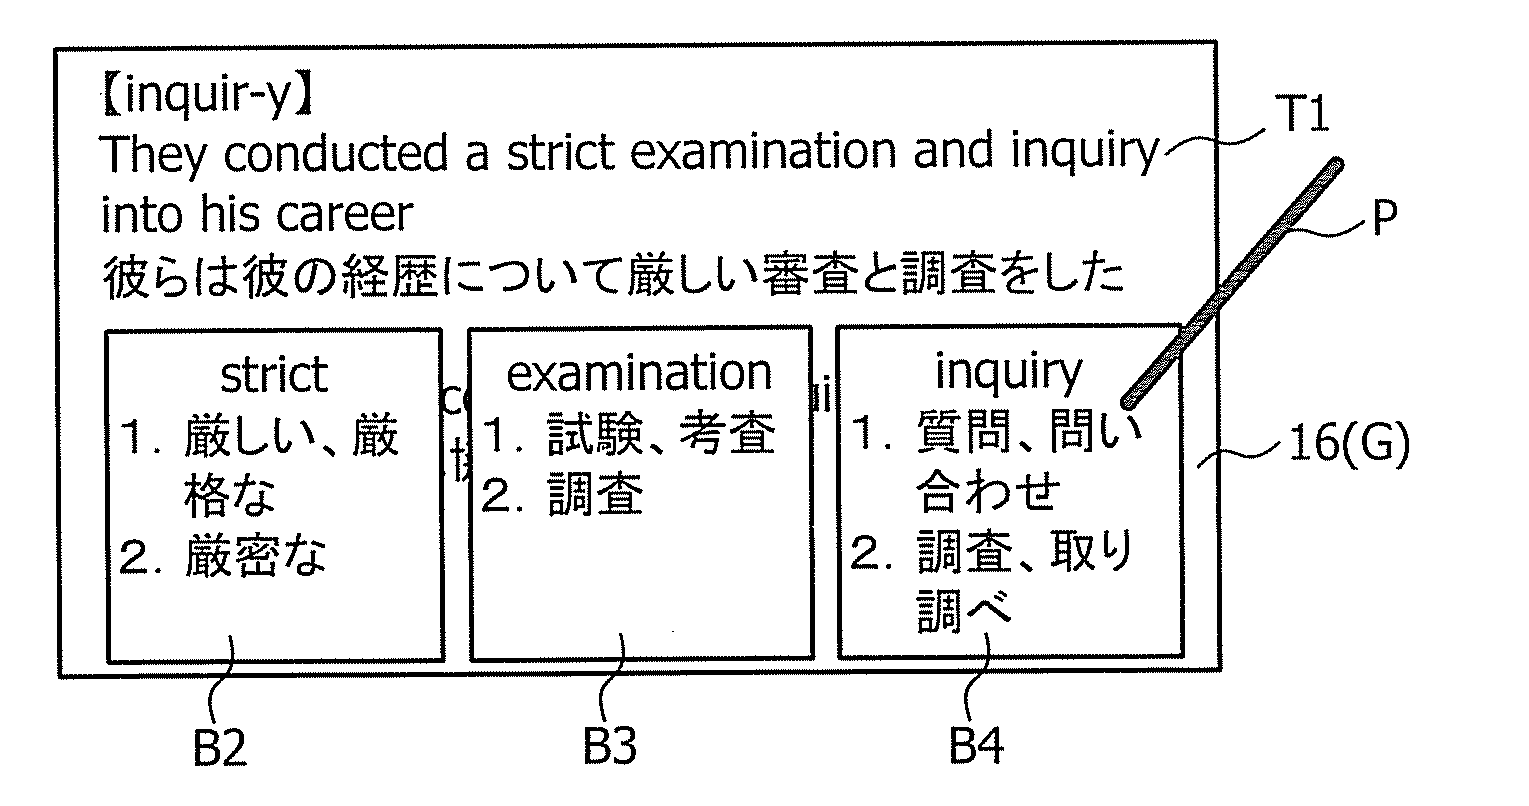 Dictionary information display device